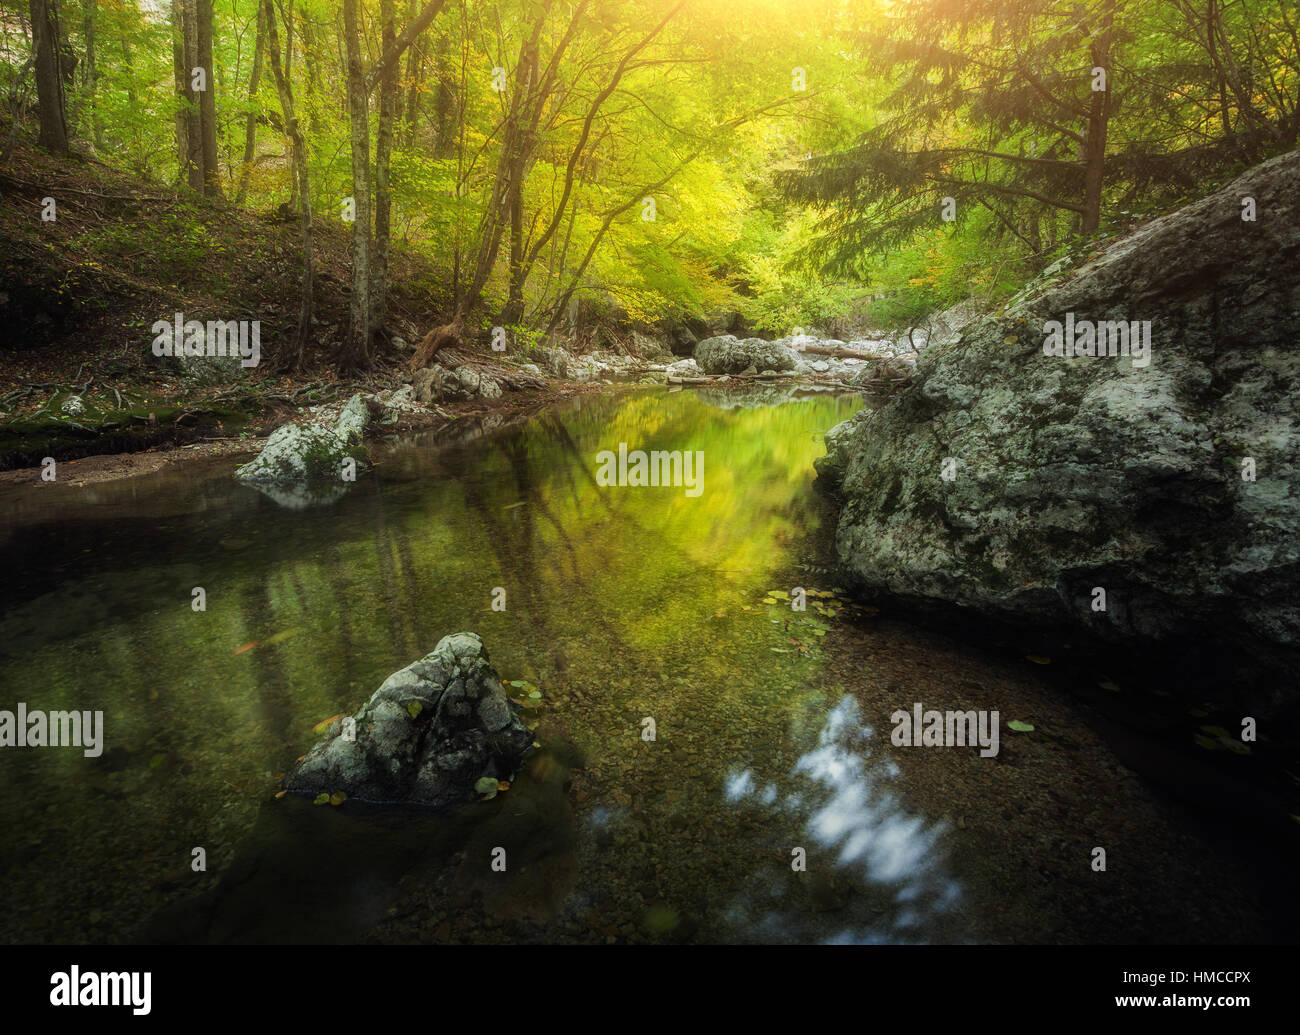 Forest and mountain river at sunset. Colorful landscape with green forest, river, rocks, stones and yellow sunlight Stock Photo